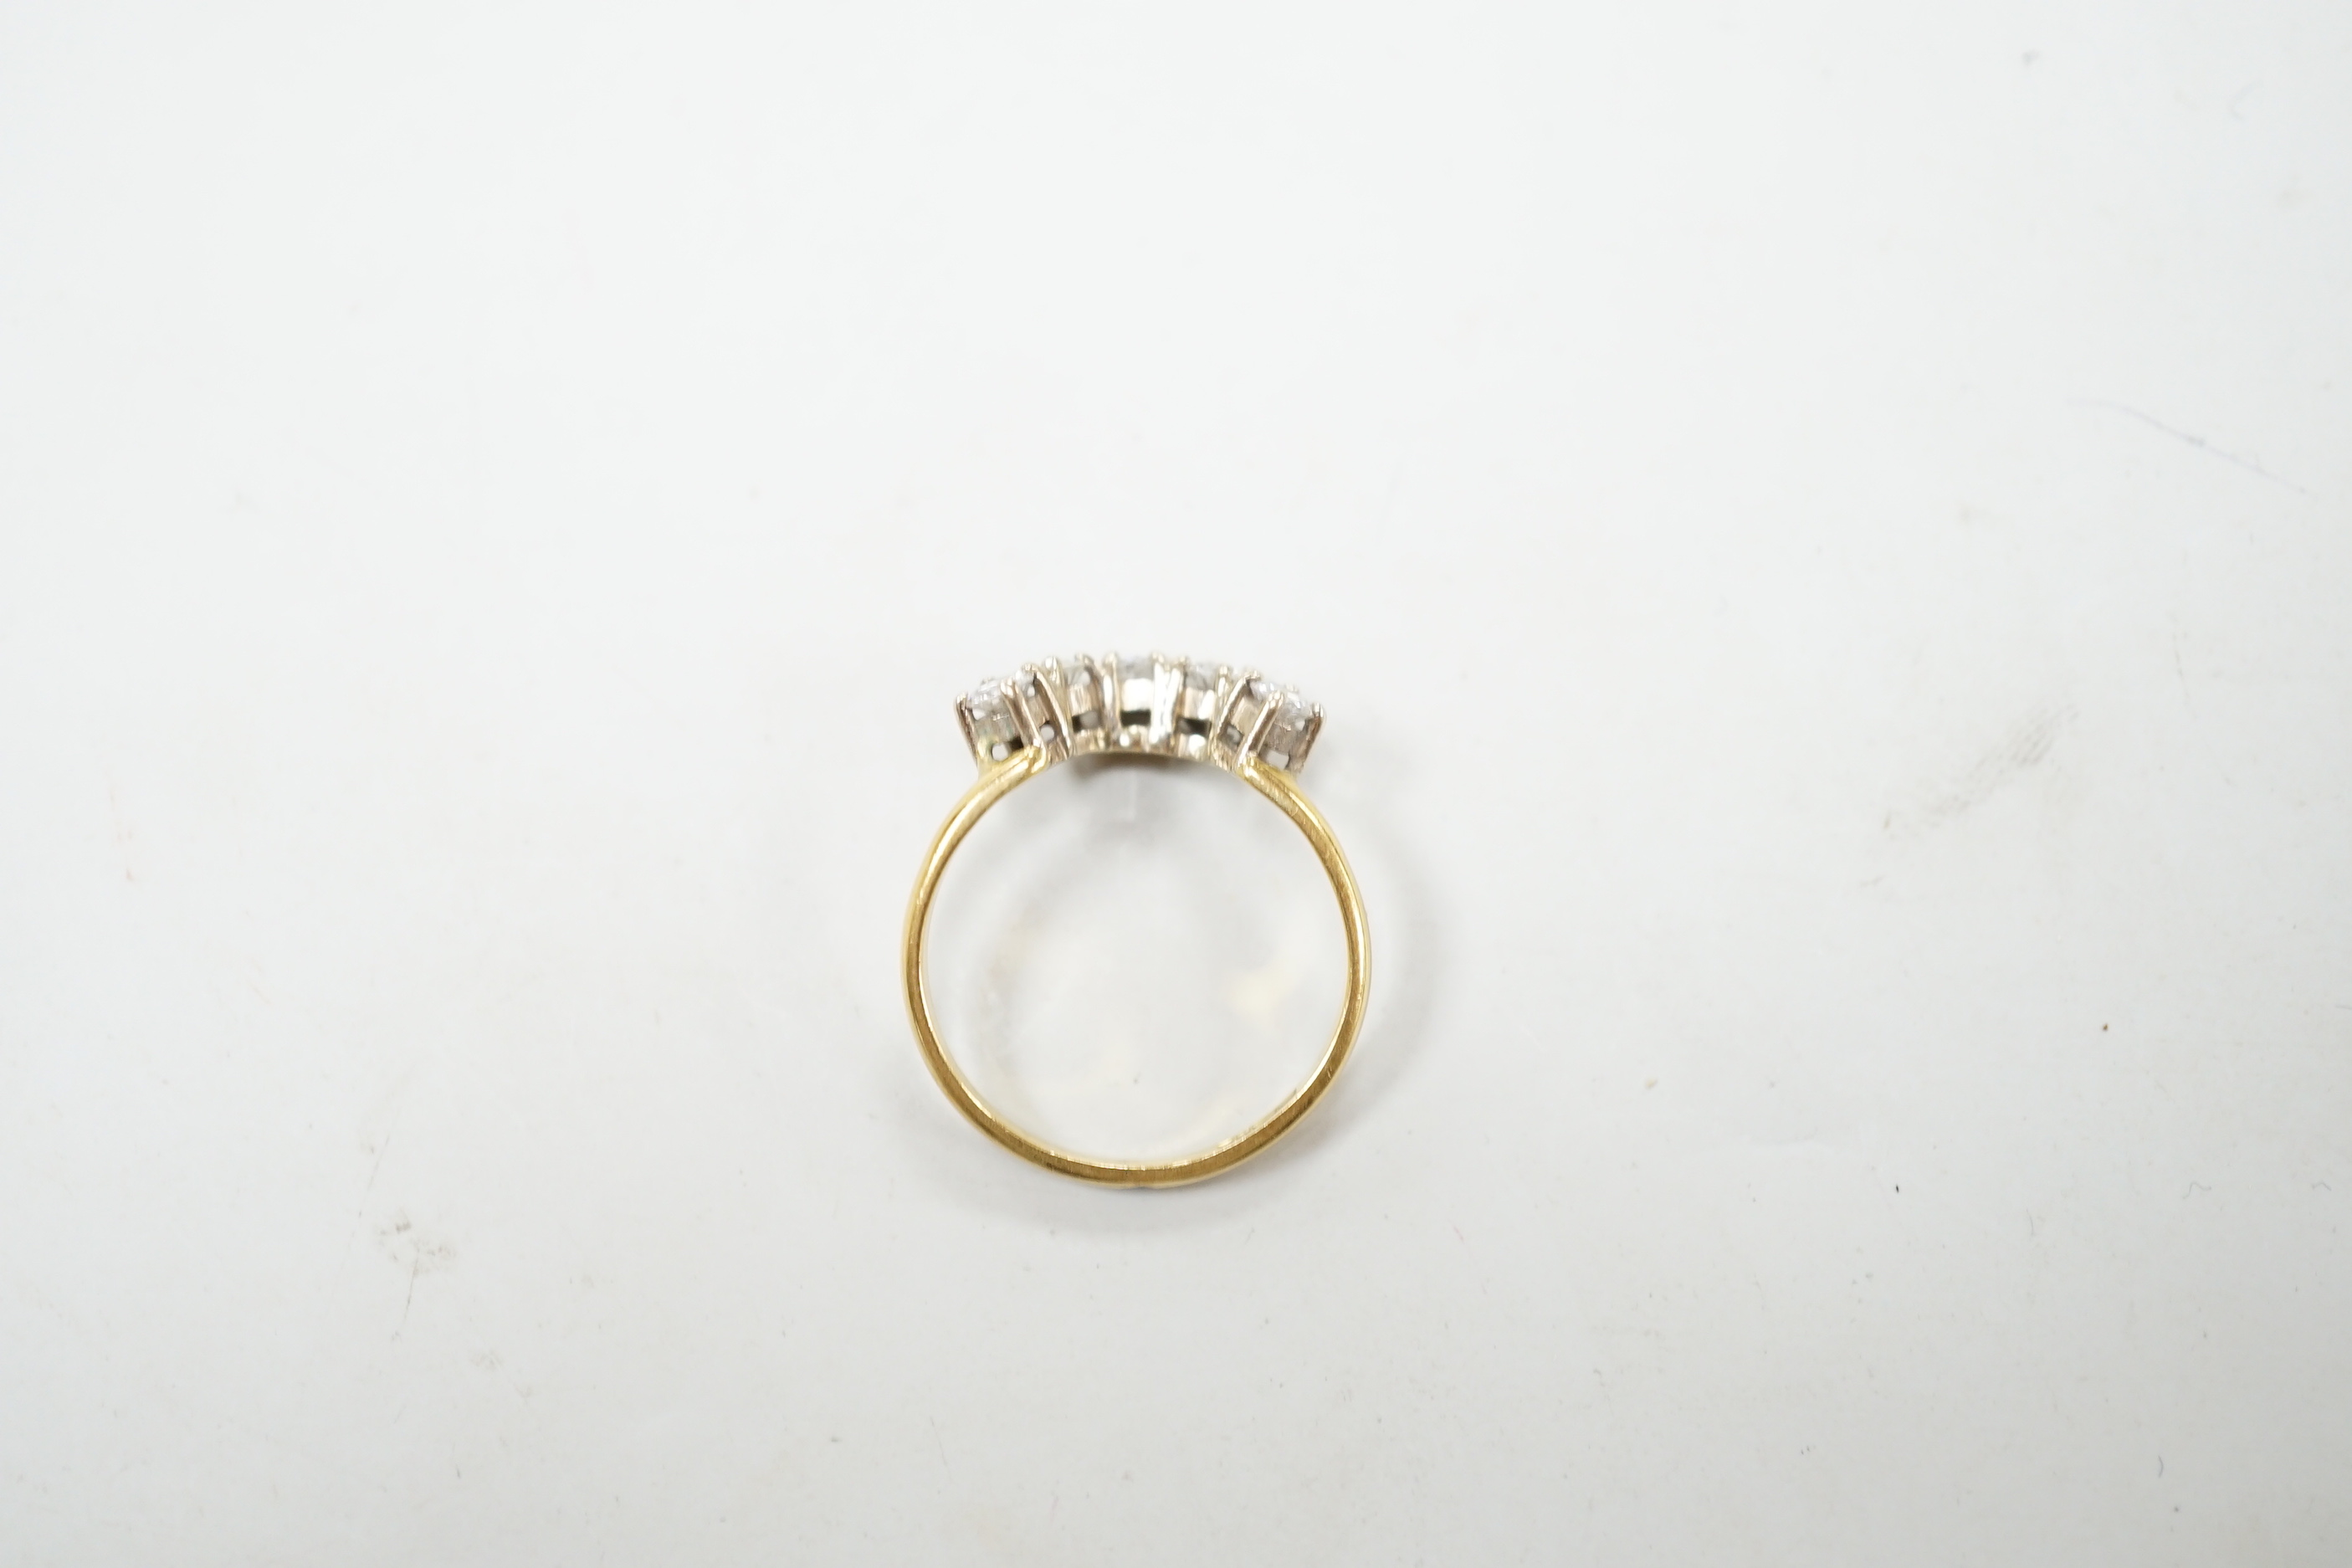 A modern 18ct gold and five stone diamond set demi-lune ring (part of a wedding set?) size M, gross 2.9 grams.